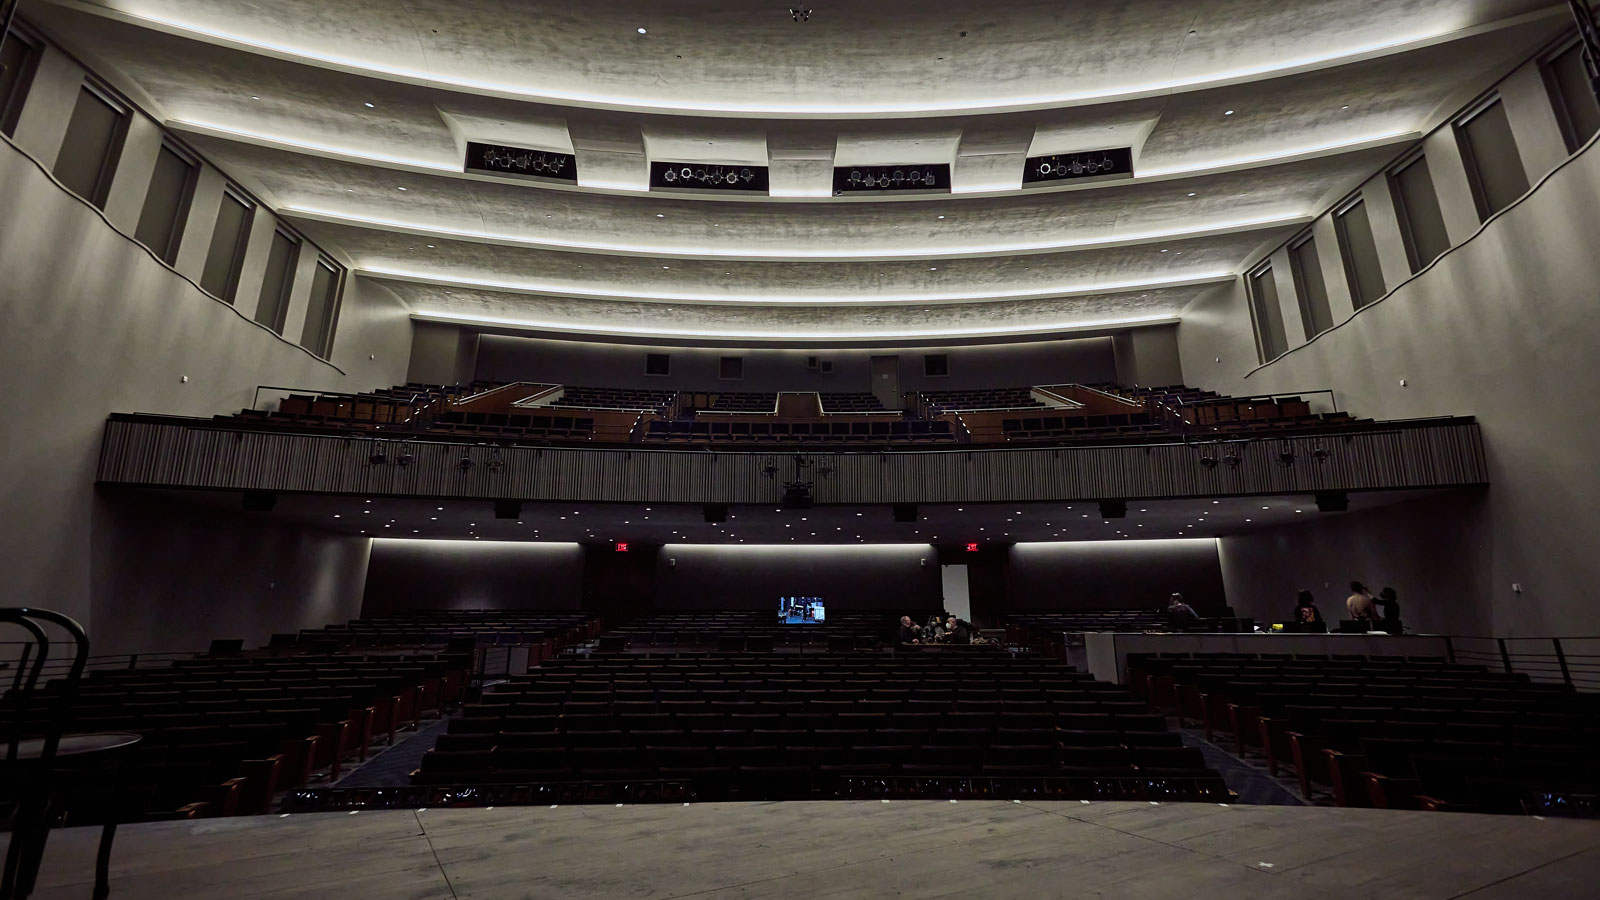 Looking out from the auditorium stage